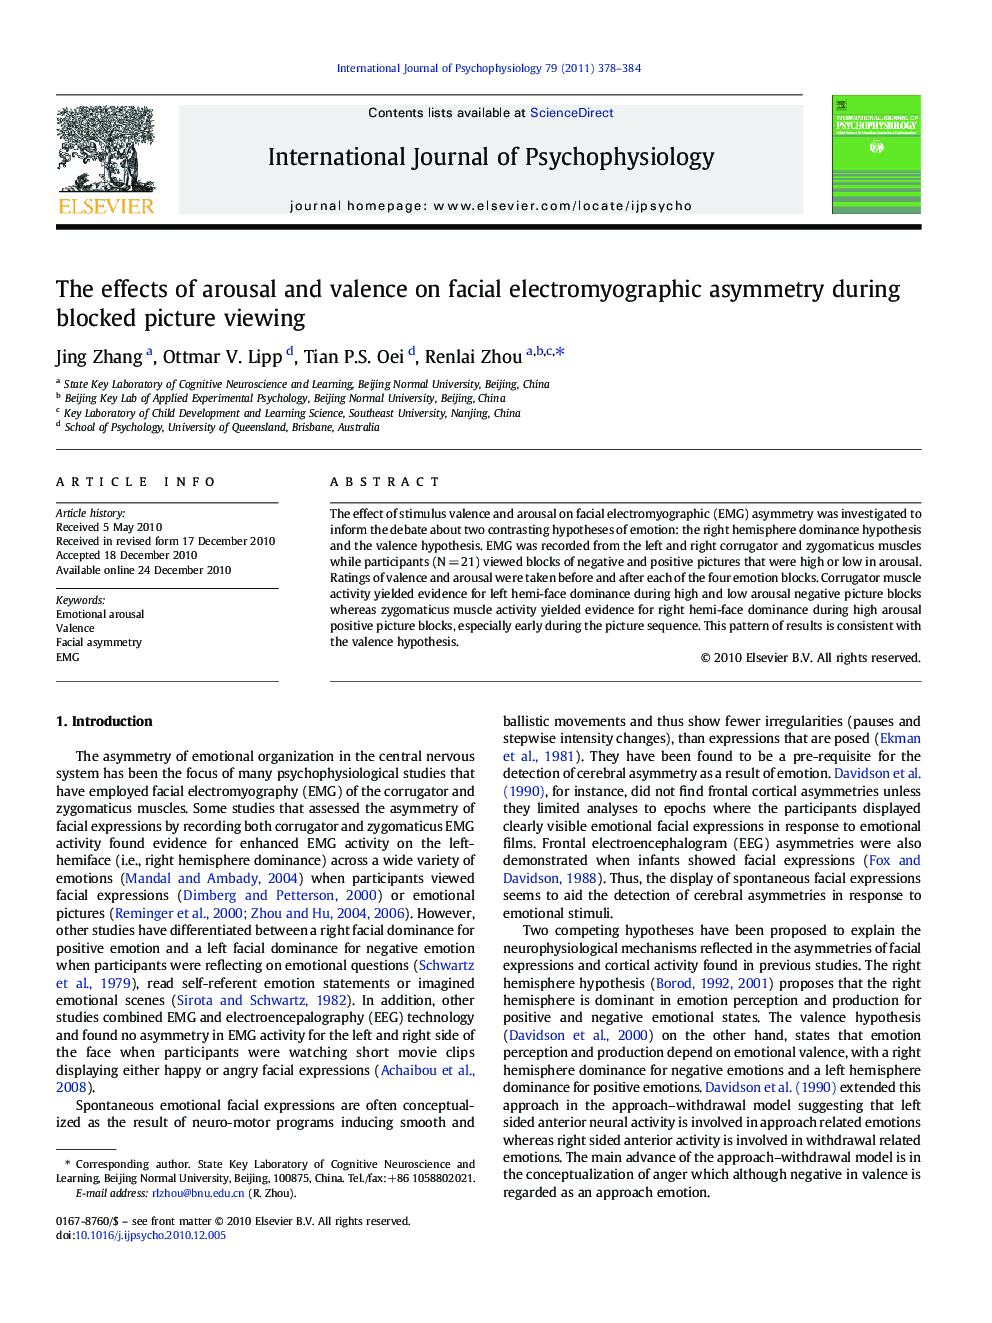 The effects of arousal and valence on facial electromyographic asymmetry during blocked picture viewing